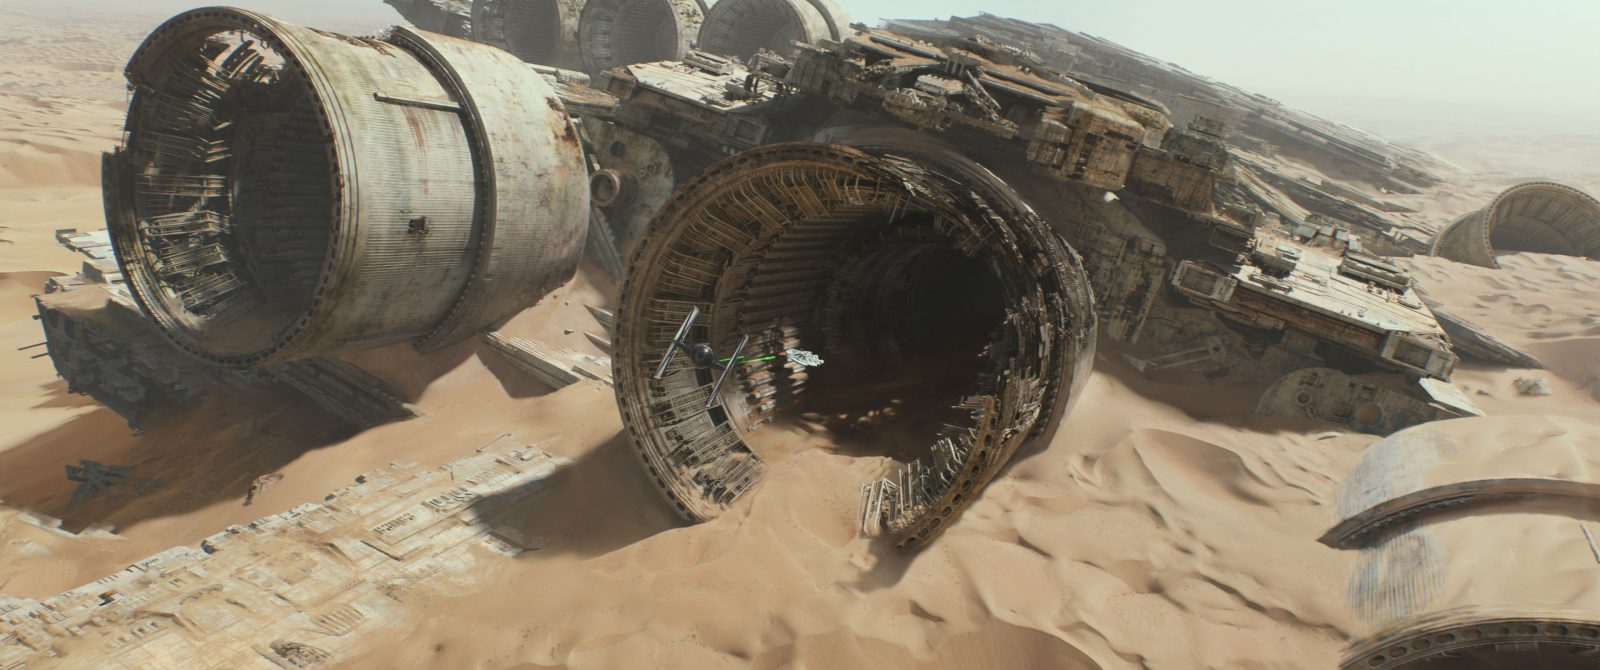 Star Wars VII The Force Awakens 19 - TIE Fighter chases Millennium Falcon into old starship